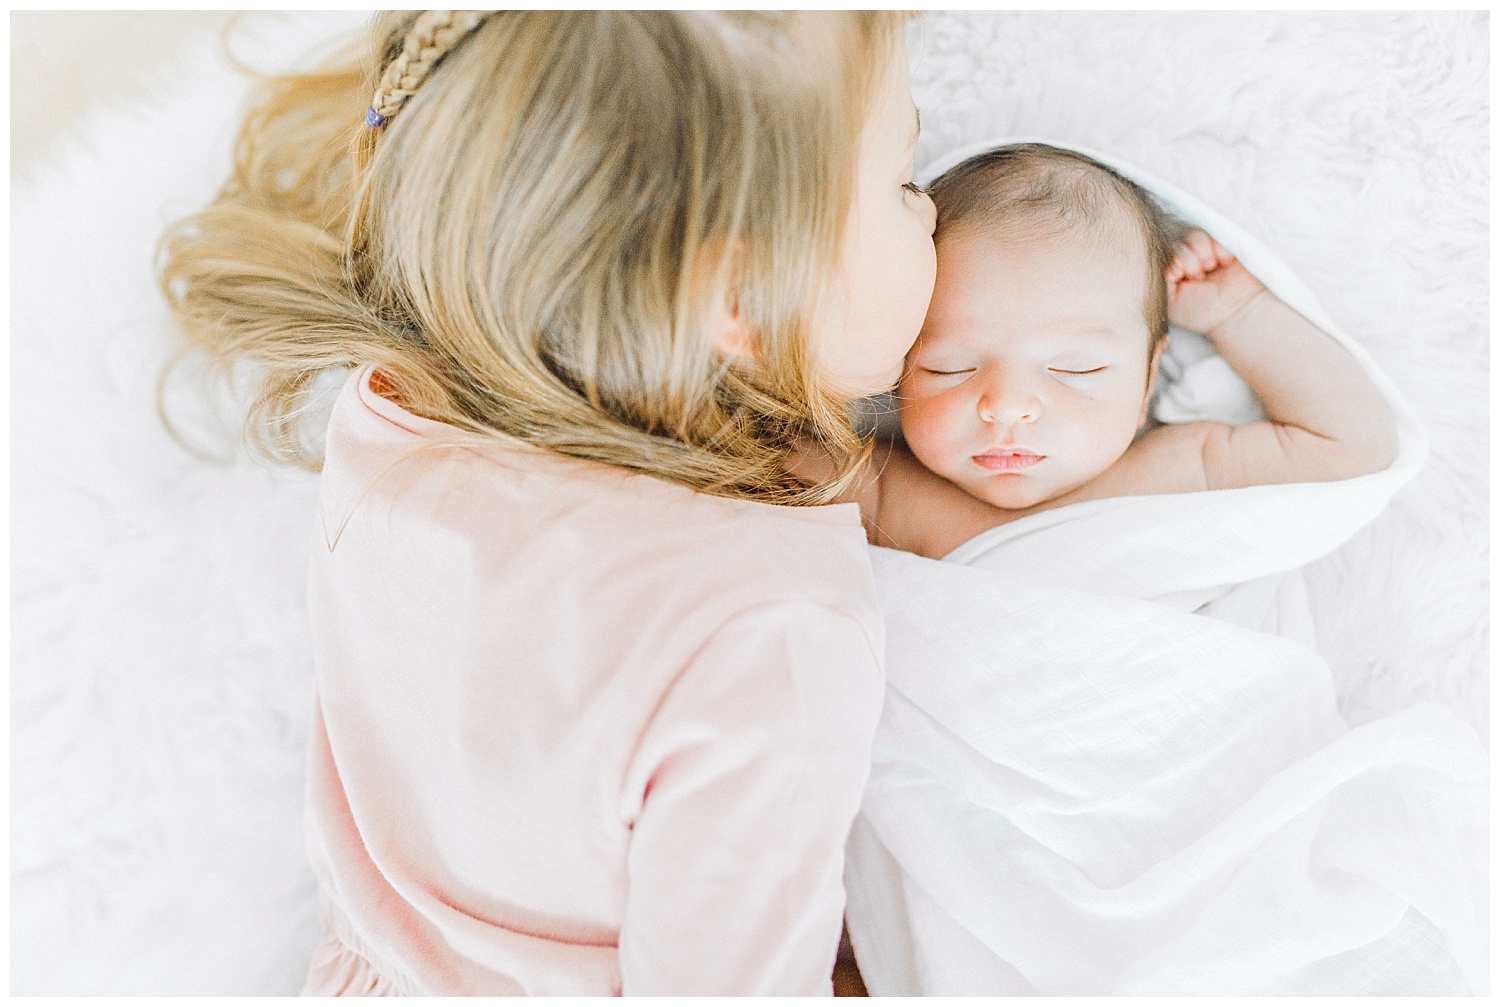 Newborn Lifestyle In-Studio Photo Session Light and Airy Kindred Presets Emma Rose Company Seattle Portland Wedding and Portrait Photographer3.jpg